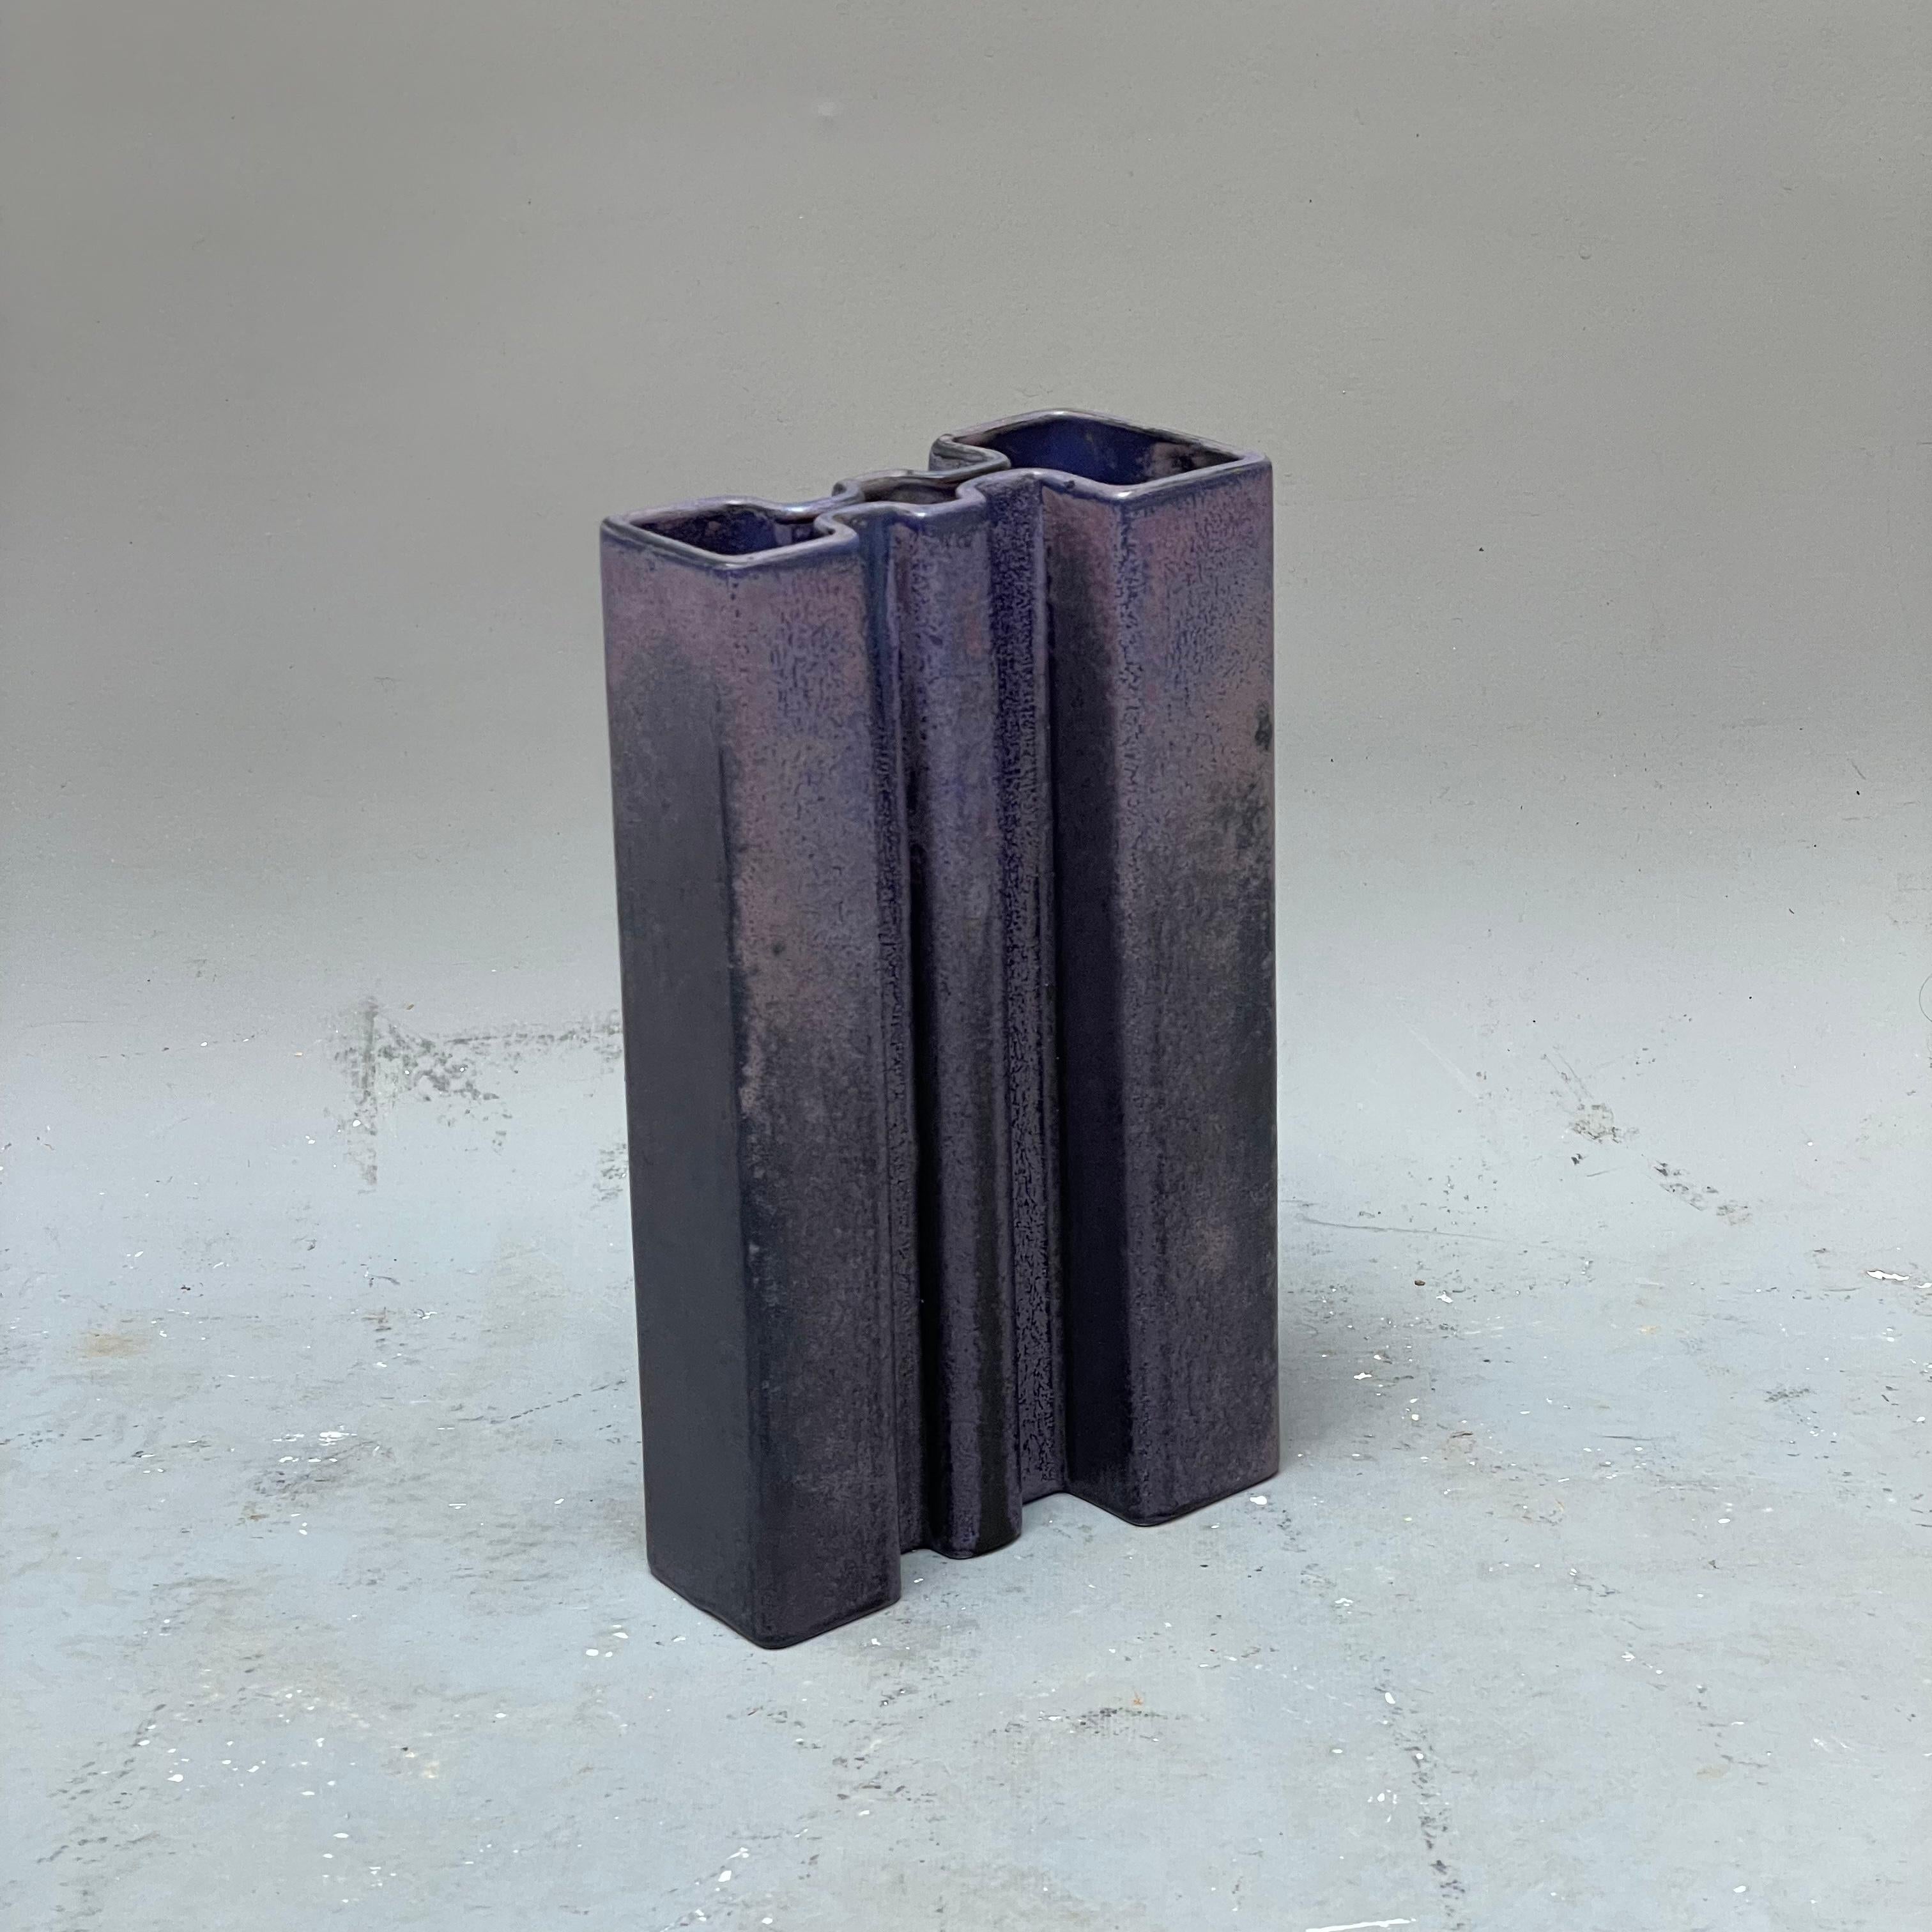 Angelo Mangiarotti was an Italian architect and designer known for his work in furniture and product design. He created a number of elegant and minimalist vases that are highly regarded for their simple, yet refined designs.
Mangiarotti's vase